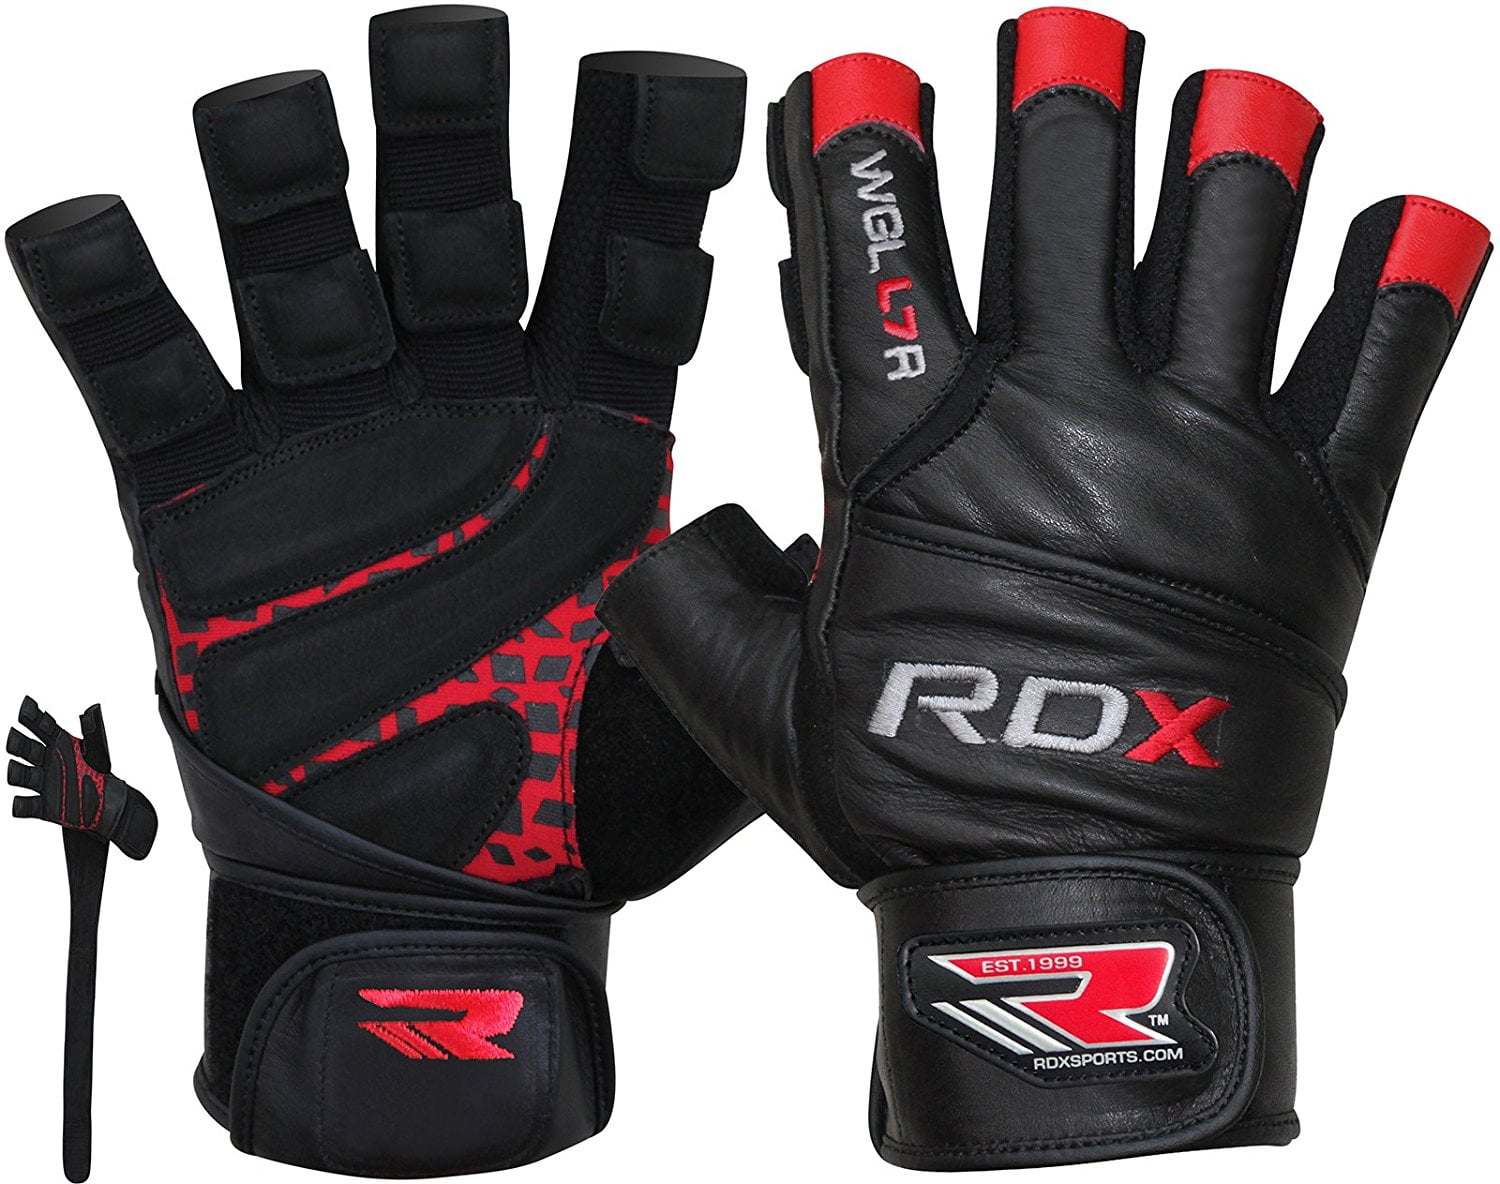 RDX Gel Weight Lifting Gloves Bodybuilding Gym Leather Long Straps Grip Training 